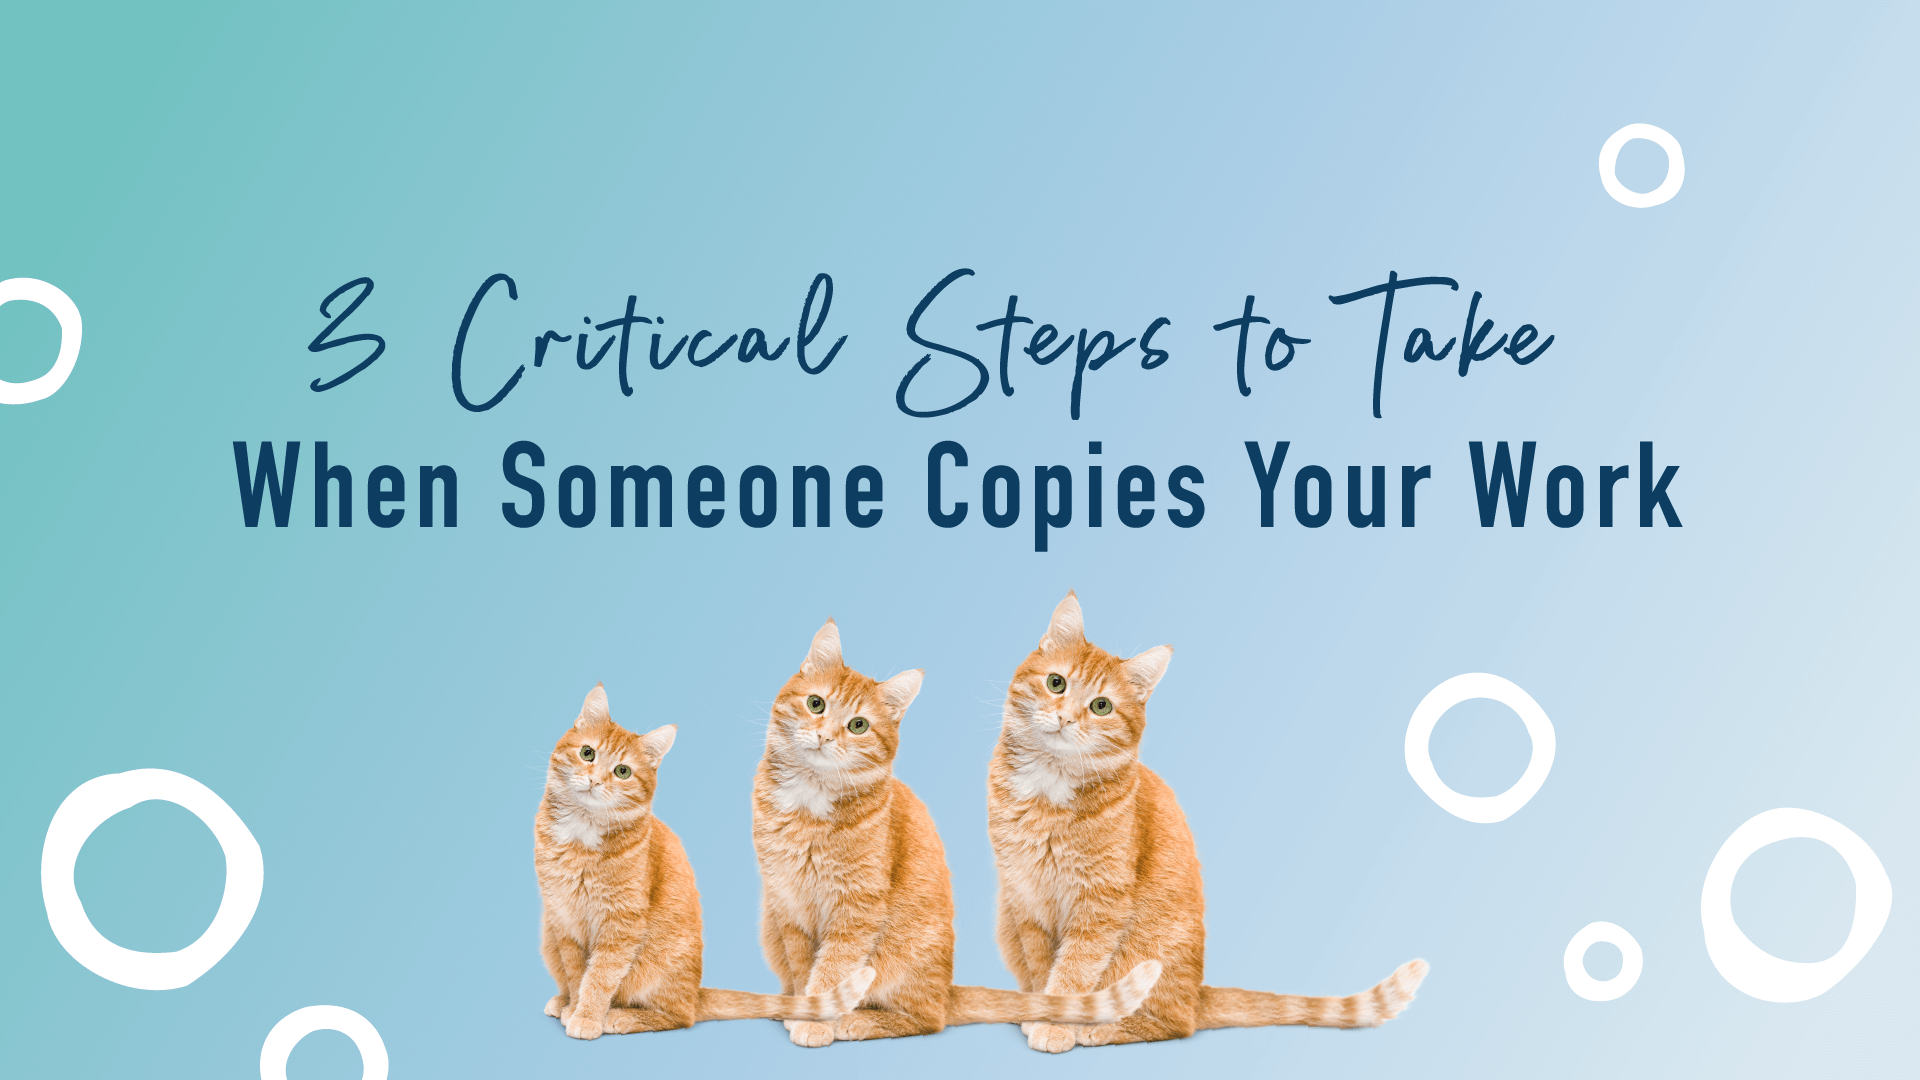 3 Critical Steps to Take When Someone Copies Your Work